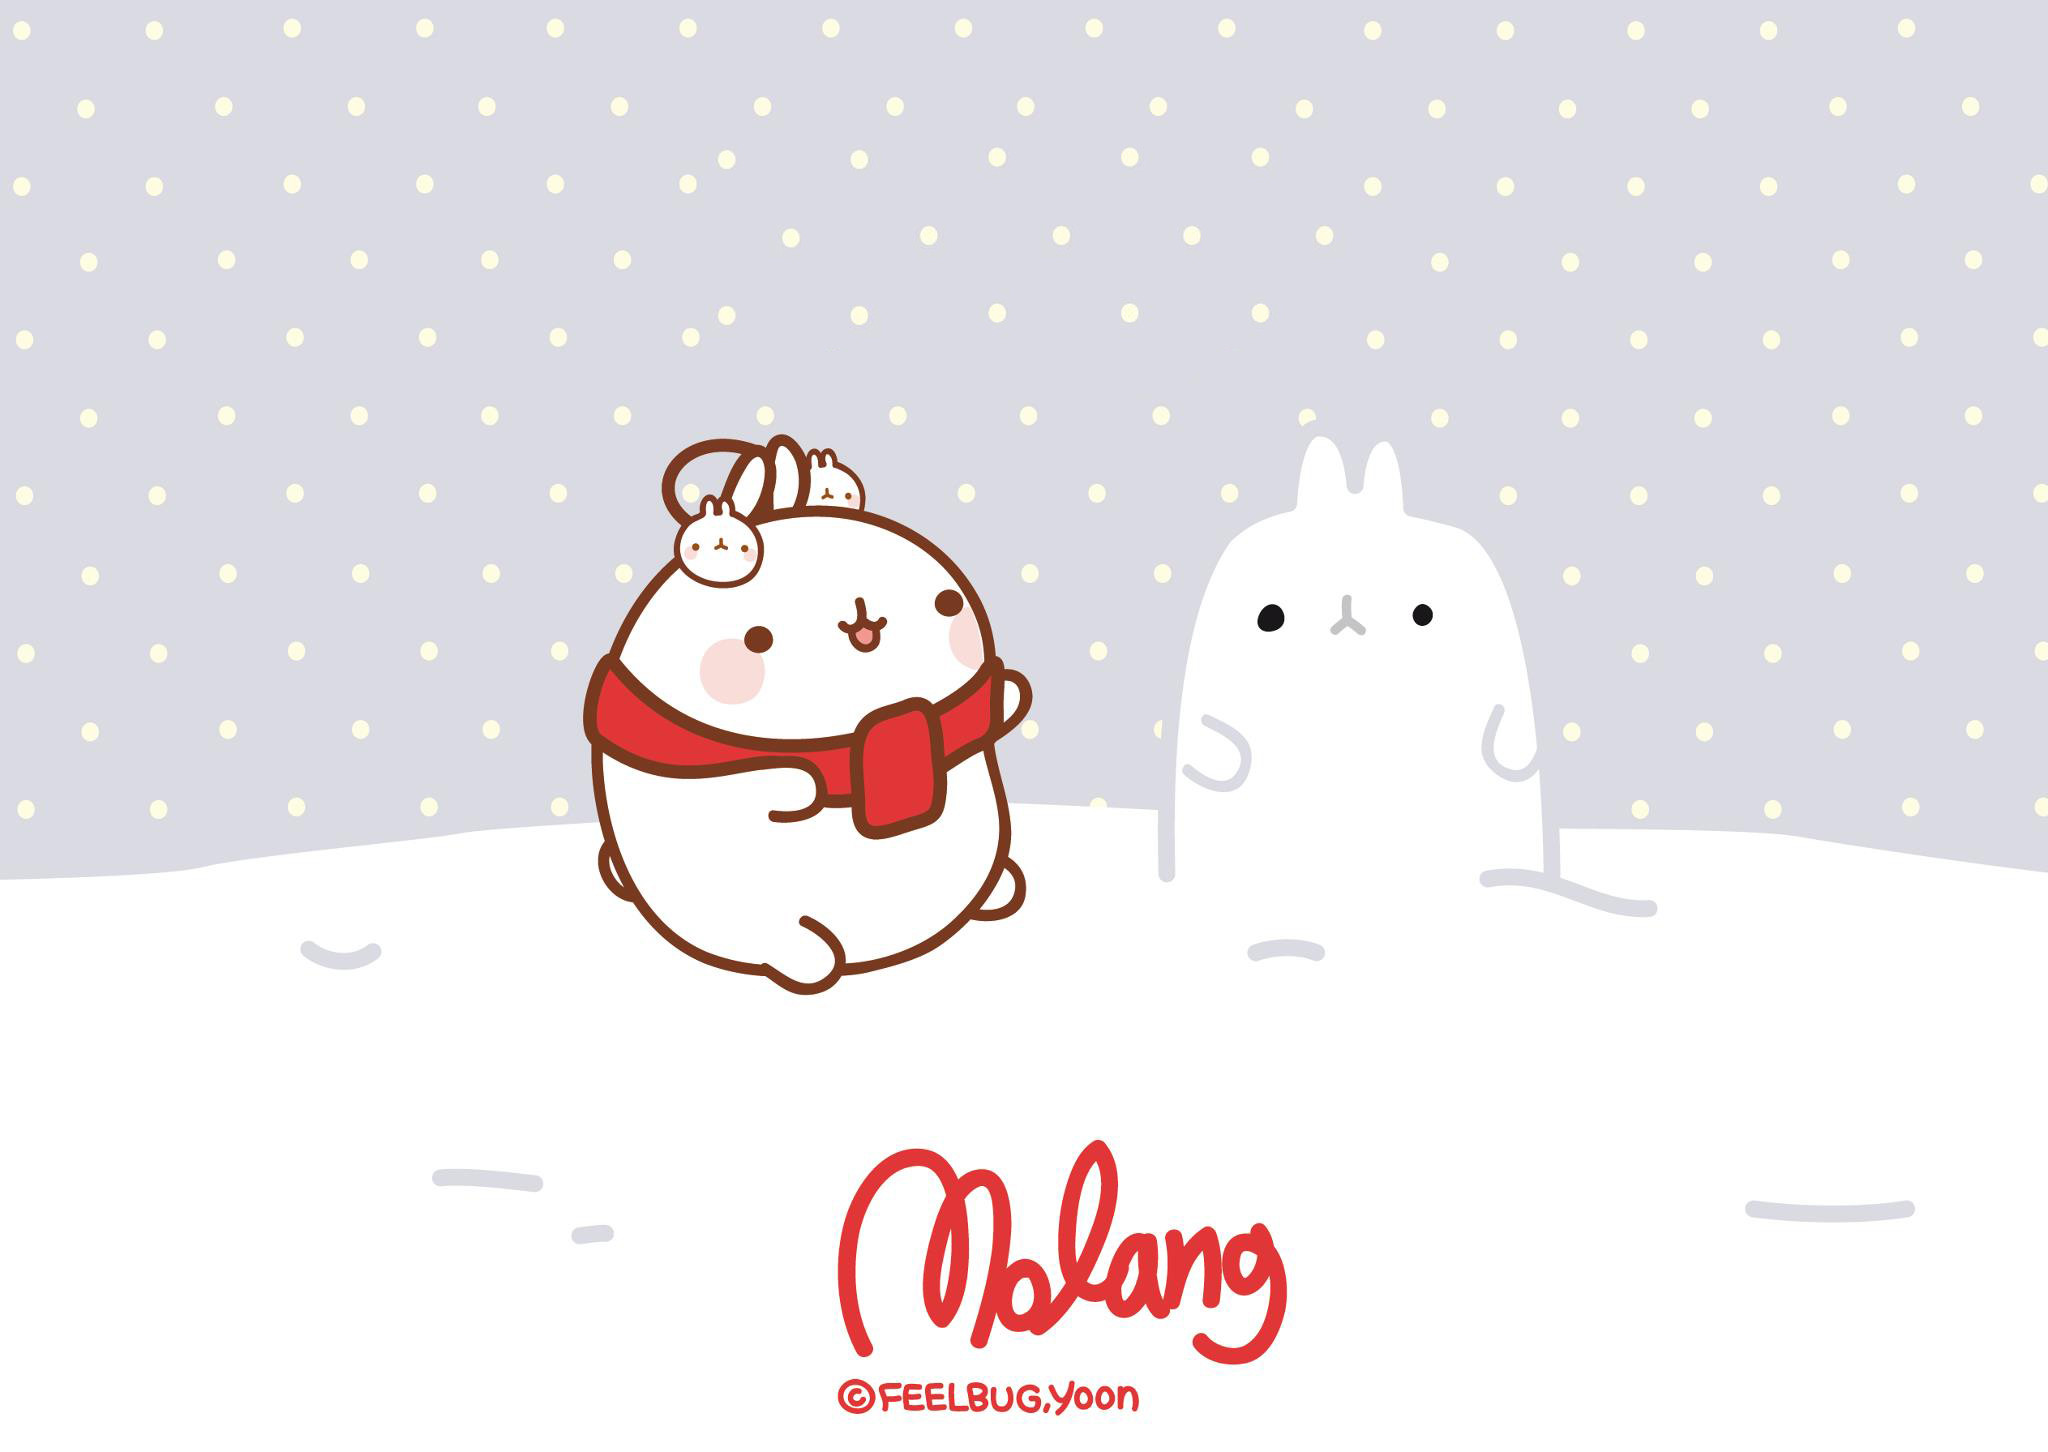 2048x1452 San-X Molang Christmas Desktop Wallpapers - Here are 3 super cute Molang  Desktop Backgrounds for Christmas! Click each image to be taken to the full  size ...